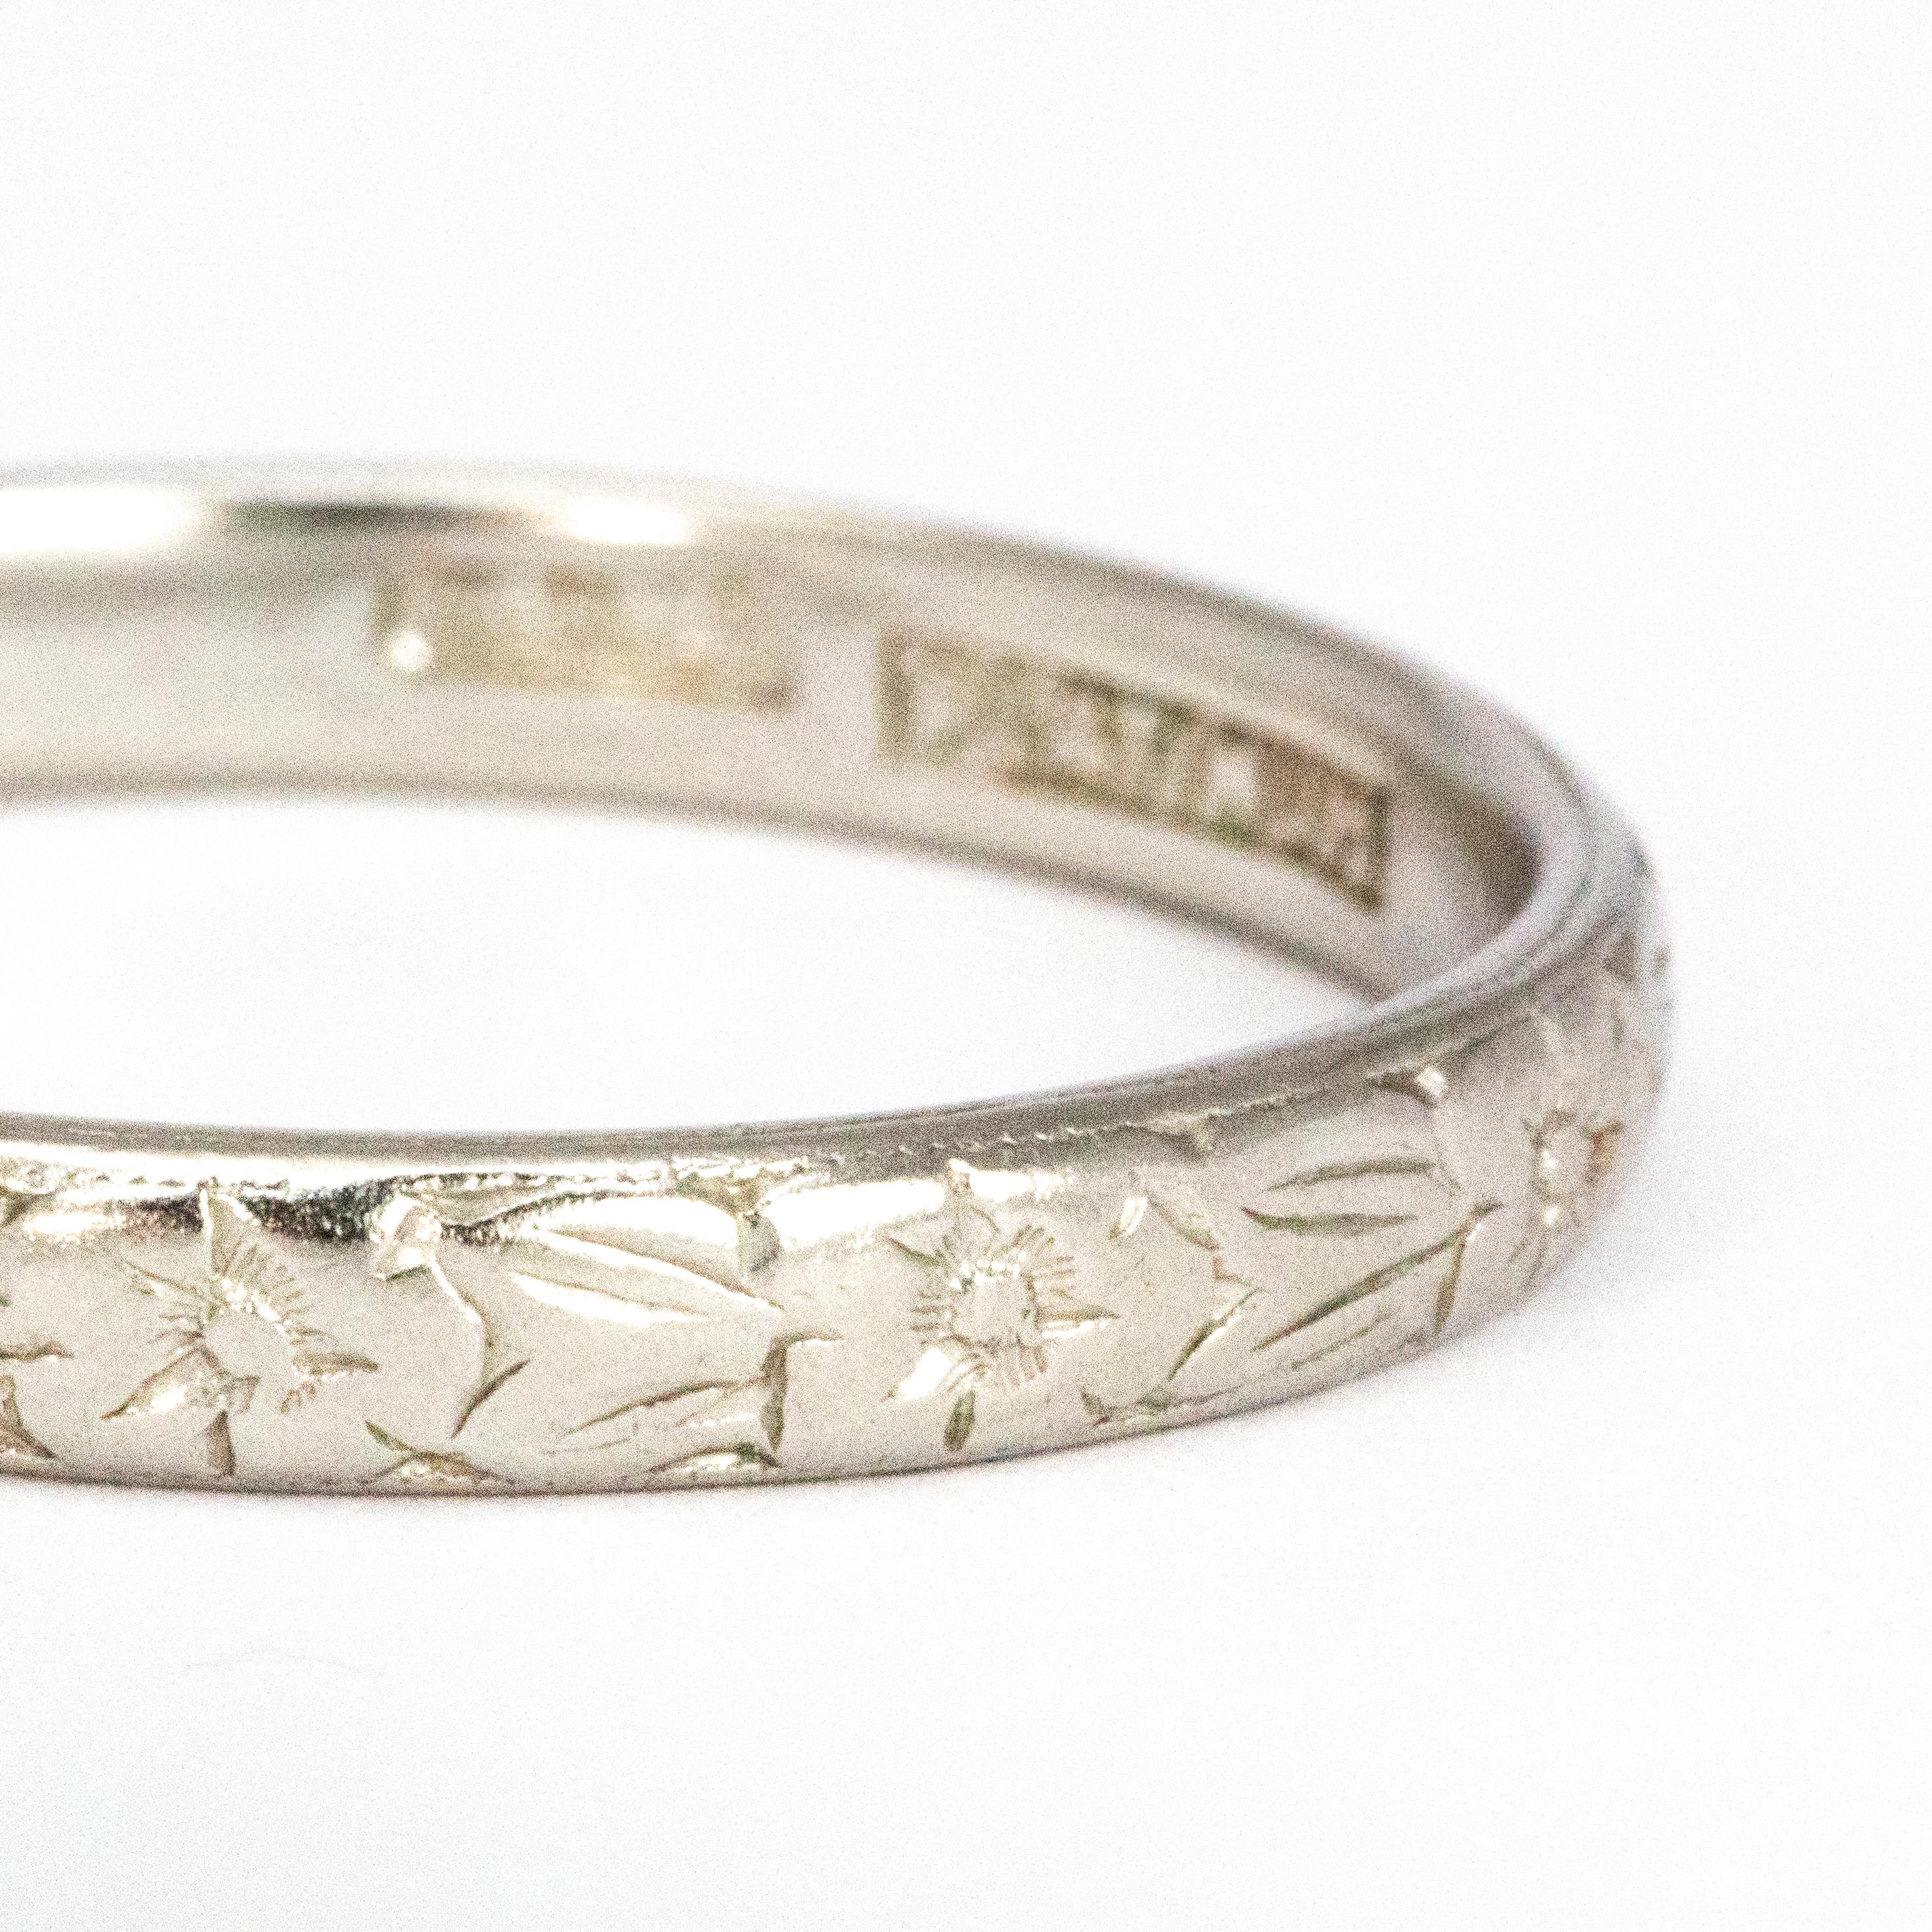 The engraving on this band is super sweet and has a flower and leaf motif.  Modelled in bright glossy platinum.

Ring Size: L or 5 3/4
Band Width: 2.5mm